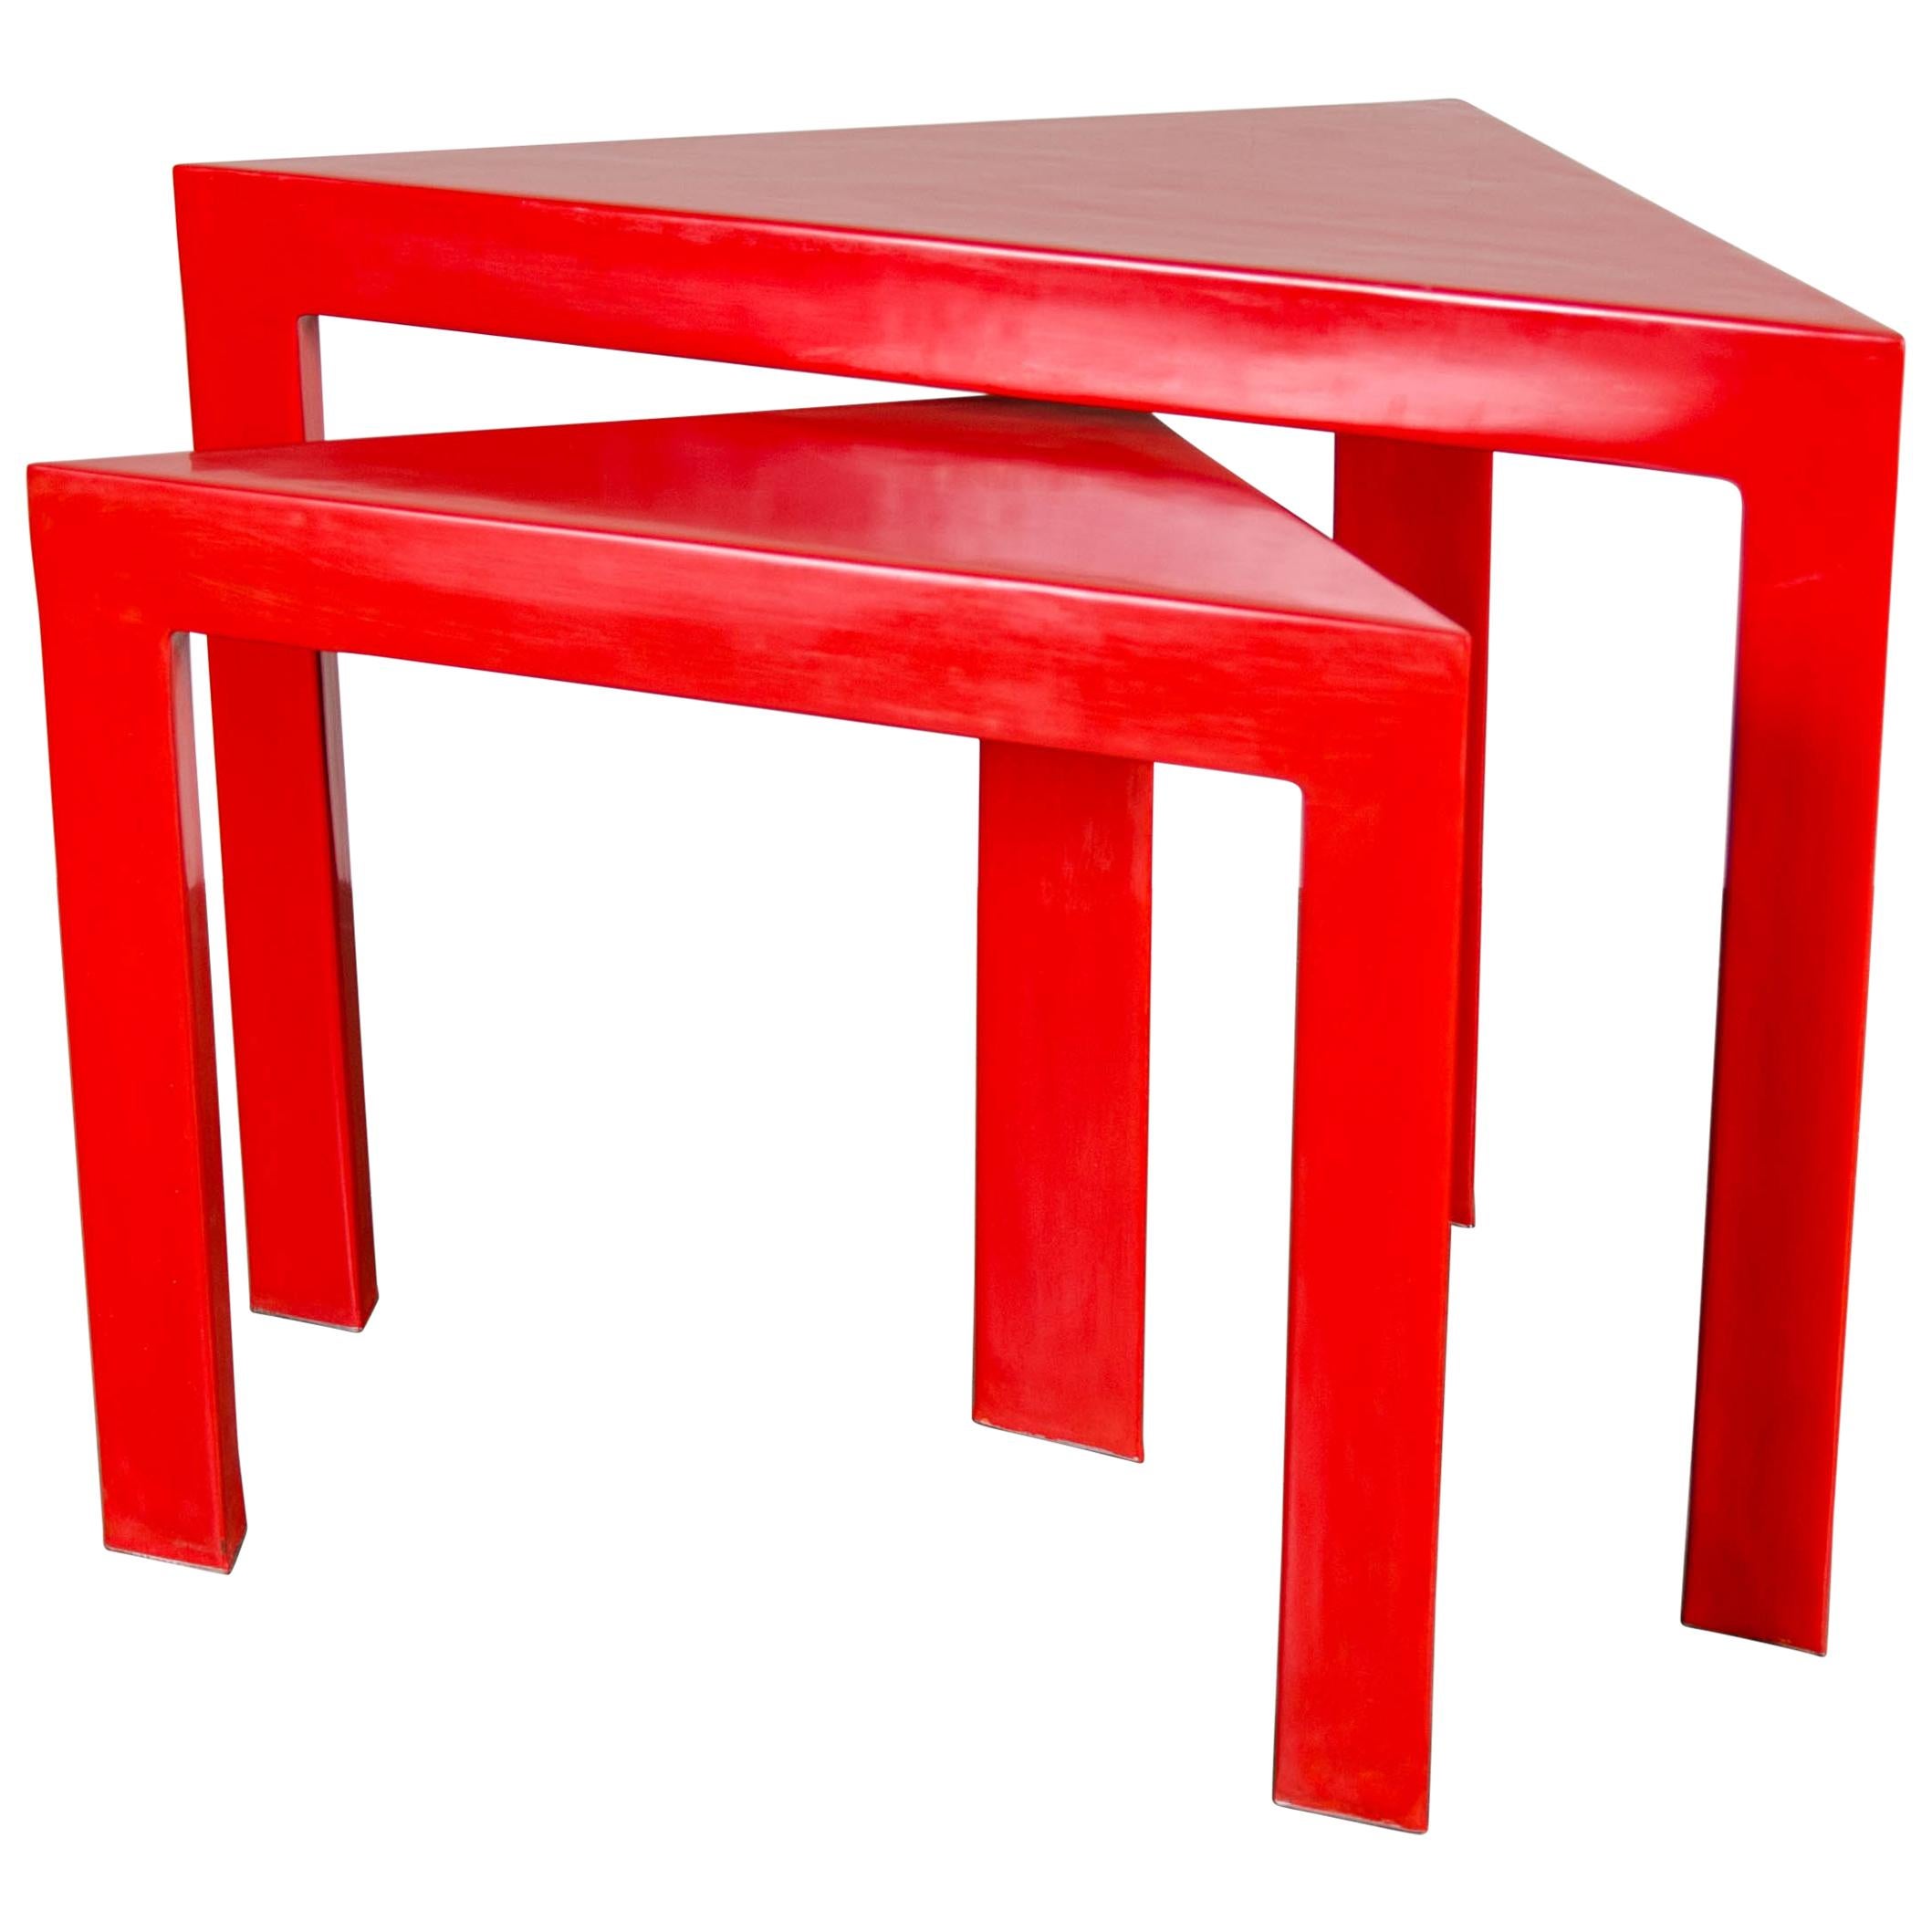 Corner Nesting Table, Red Lacquer by Robert Kuo, Set of 2, Limited Edition